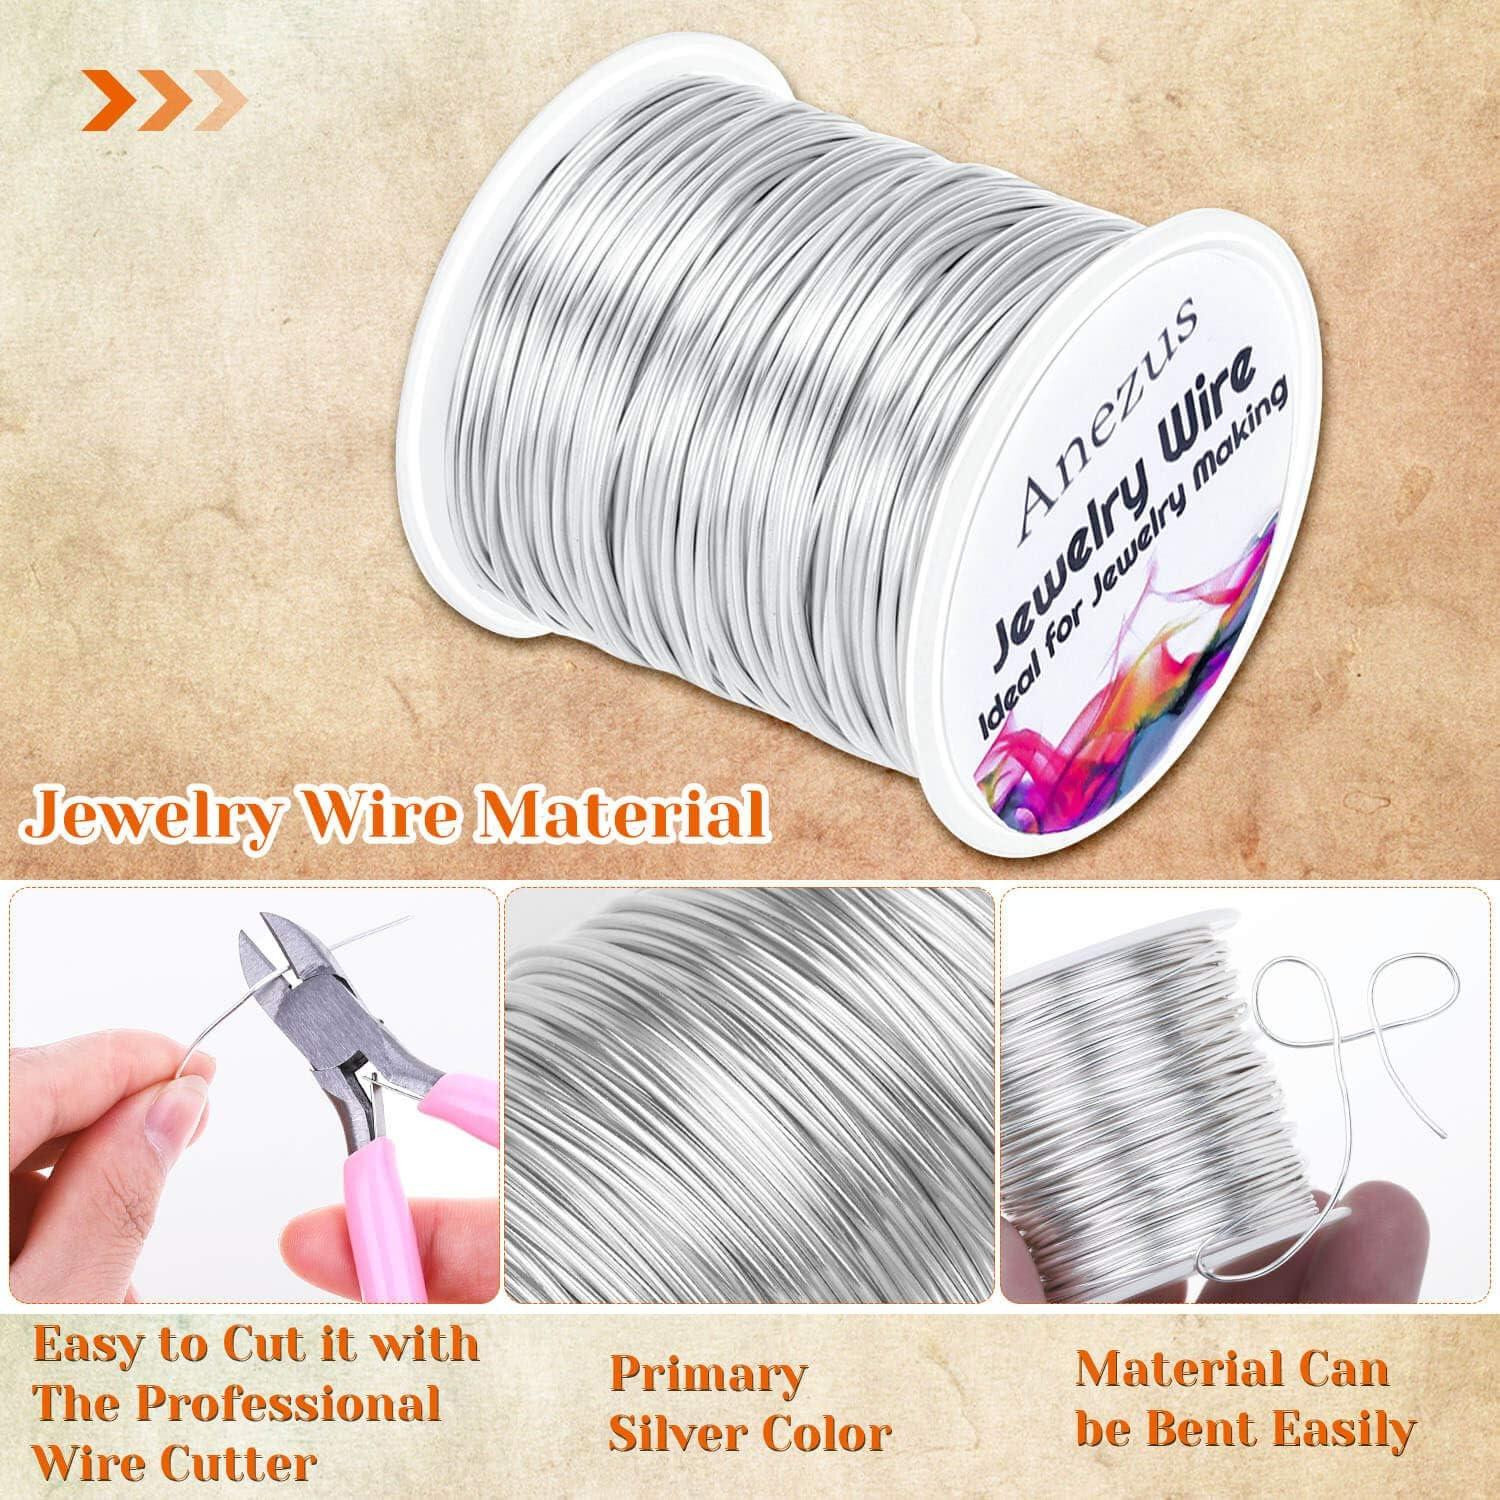 anezus 20 Gauge Jewelry Wire, Craft Wire Tarnish Resistant Copper Beading  Wire for Jewelry Making Supplies and Crafting (Silver)